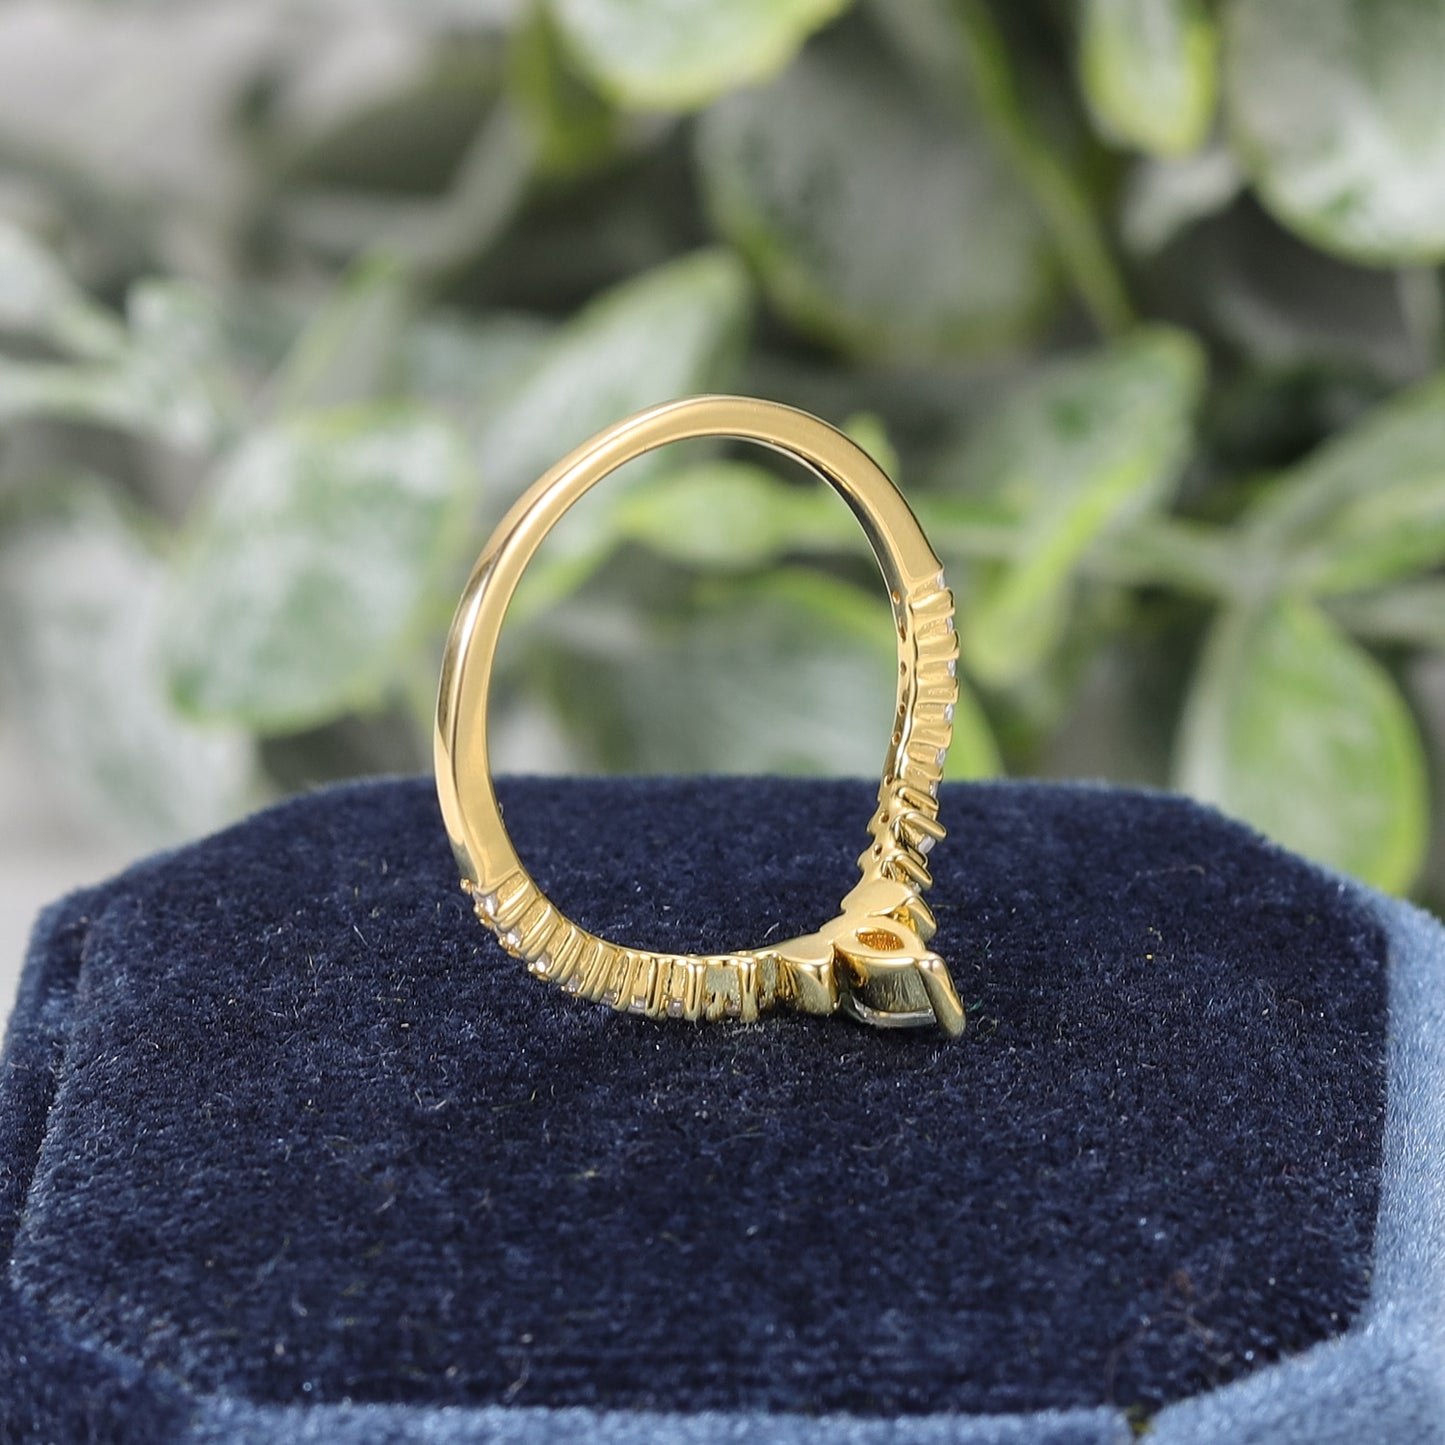 A gold chevron style wedding ring set with several small round moissanites set horizontally and two bezel set moissanites and one larger prong set moissanite at the V.